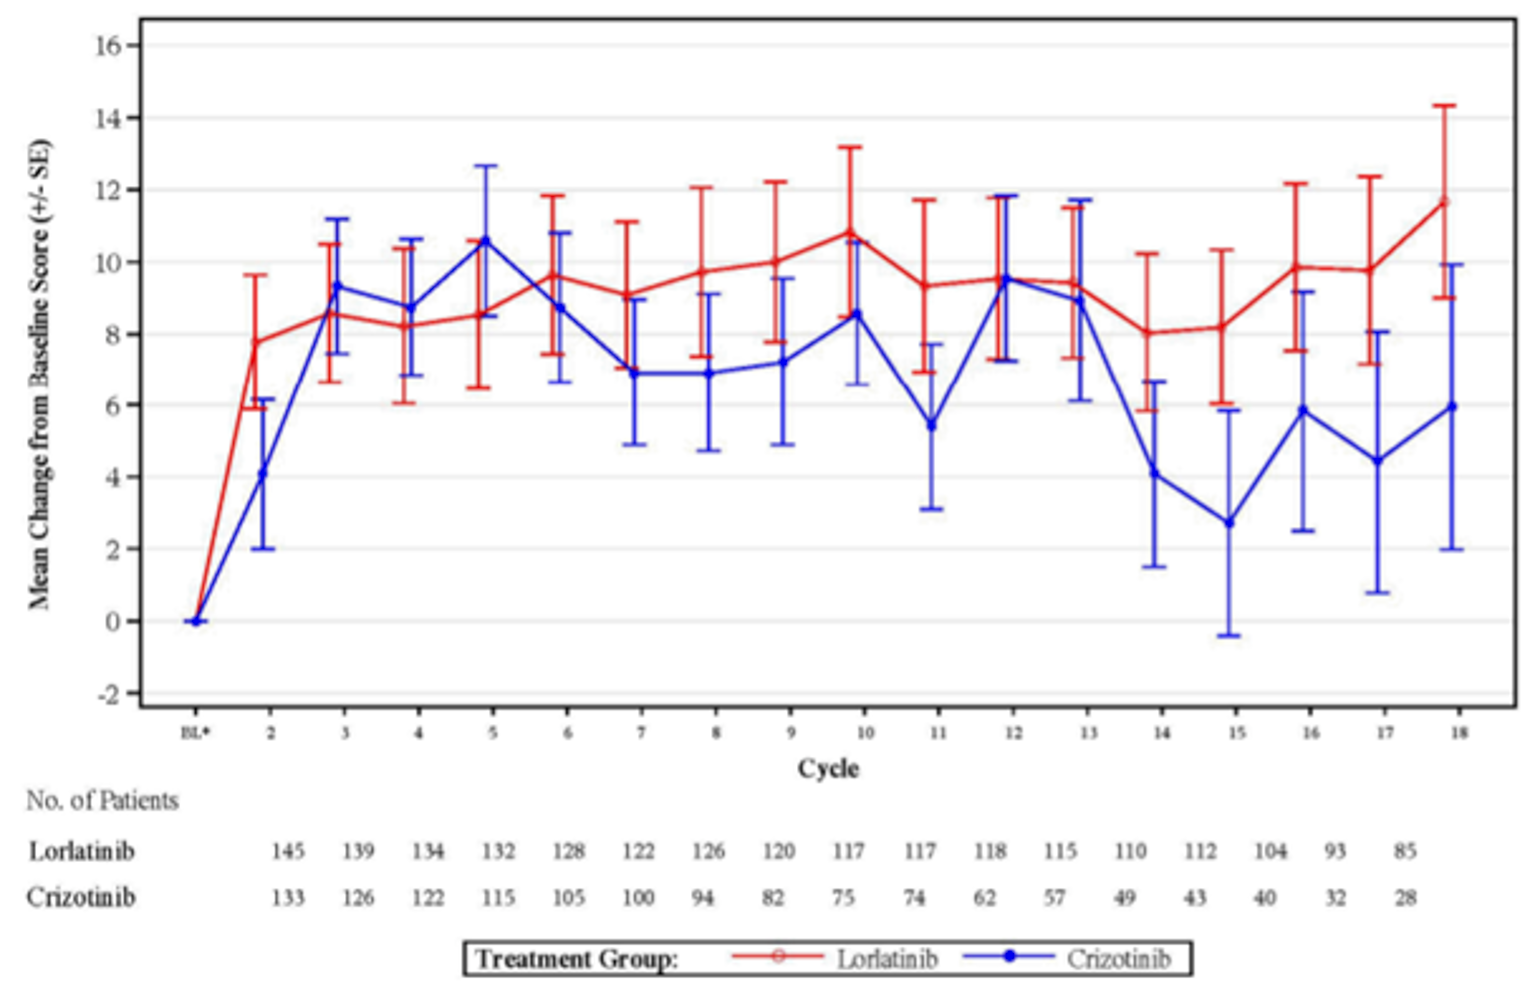 Line graph depicting the mean change from baseline in scores for the EORTC QLQ-C30 for the lorlatinib and crizotinib groups in the CROWN trial.